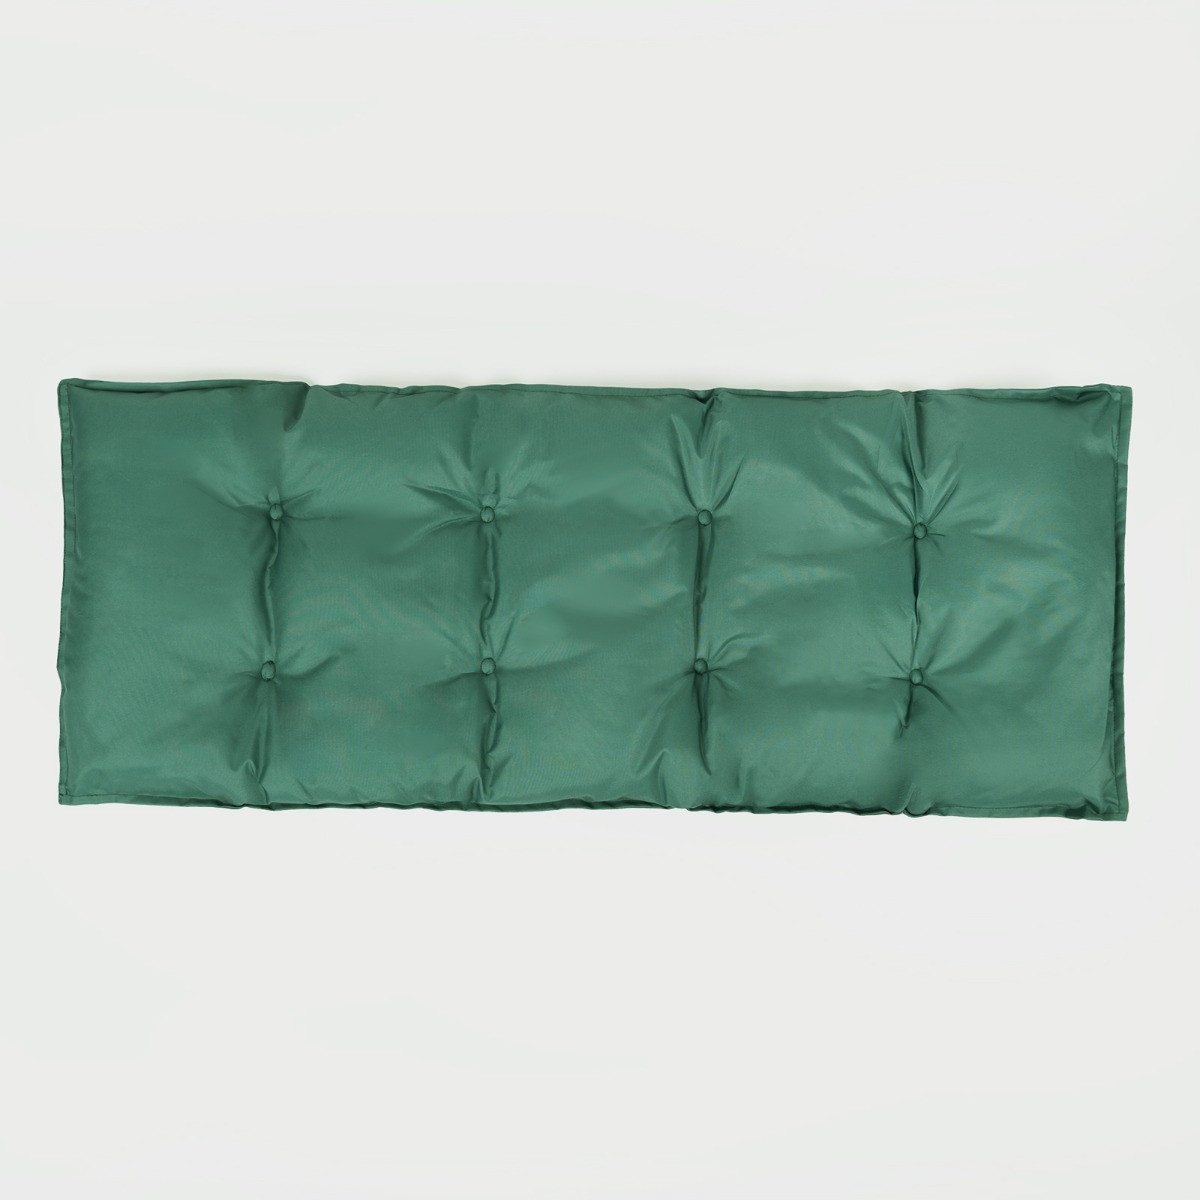 OHS 2 Seater Water Resistant Bench Pad, 110cm x 40cm - Forest Green>